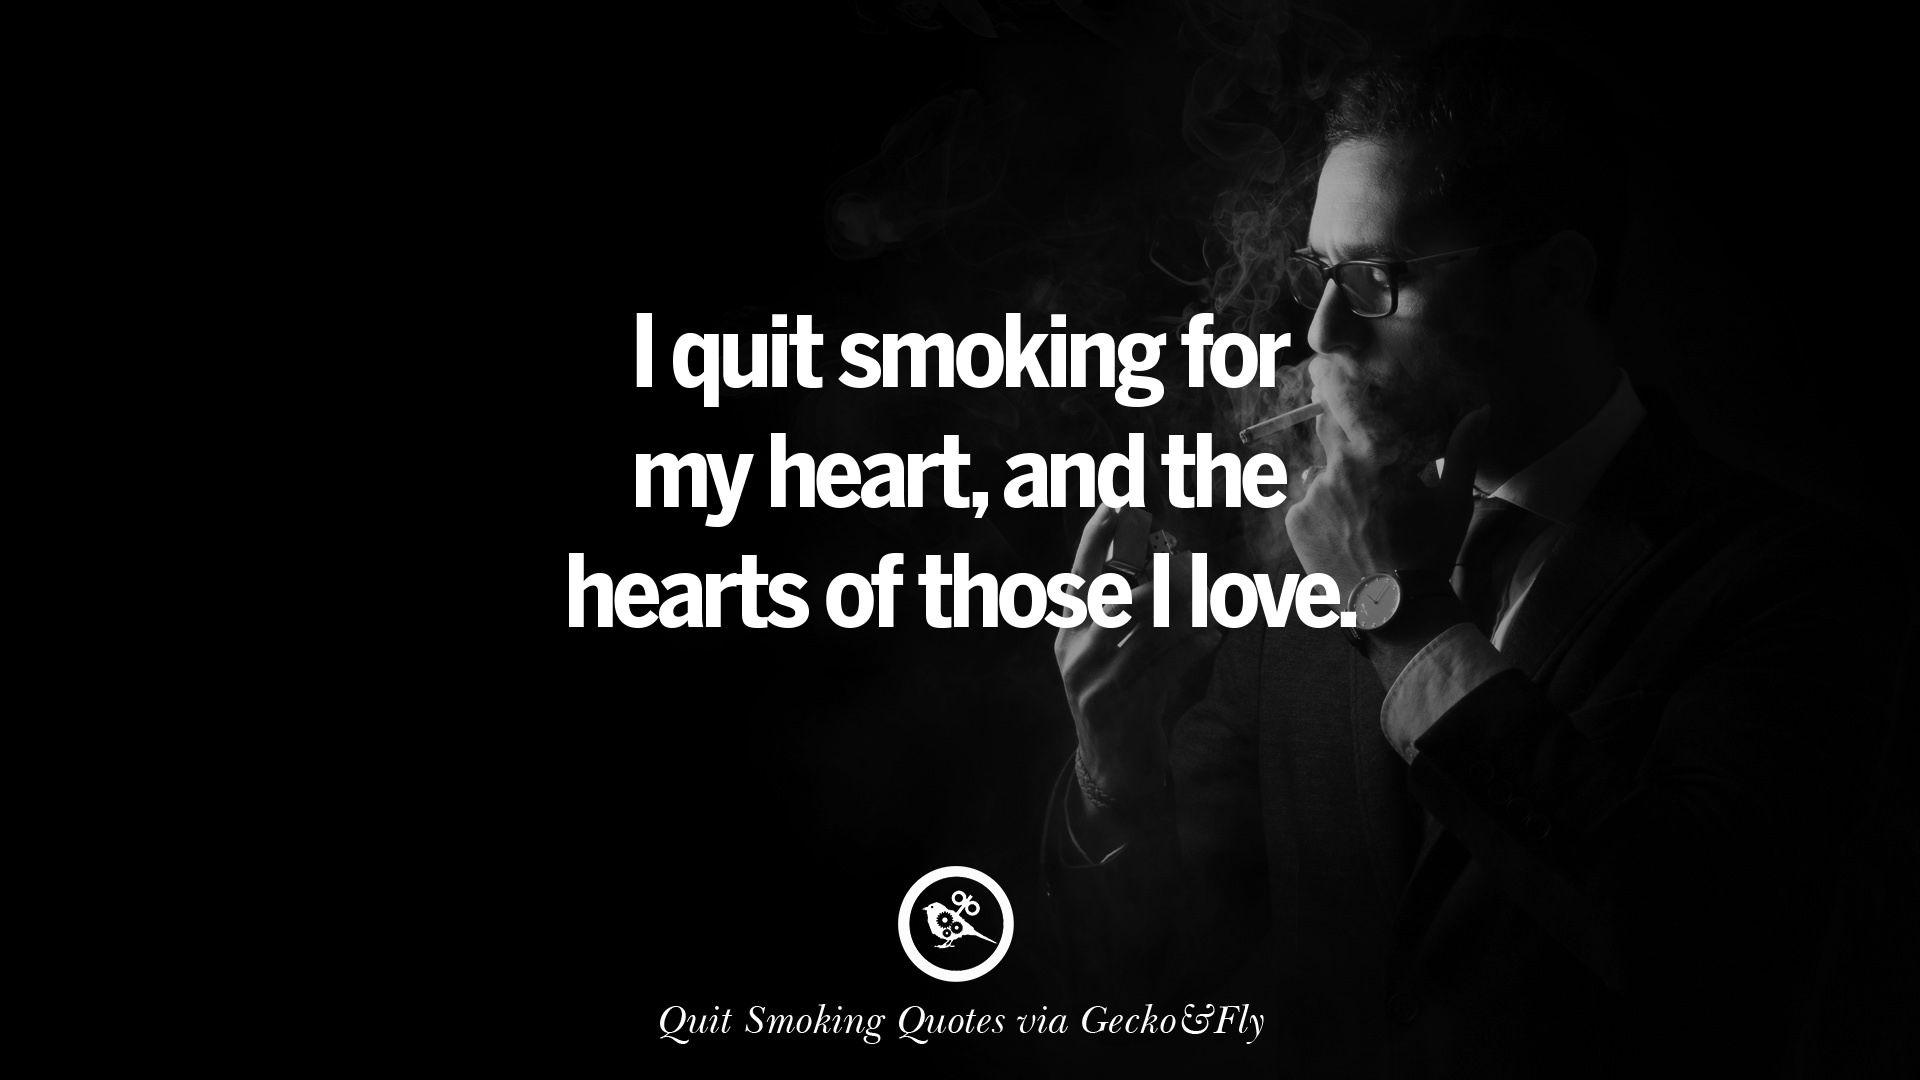 Motivational Slogans To Help You Quit Smoking And Stop Lungs Cancer